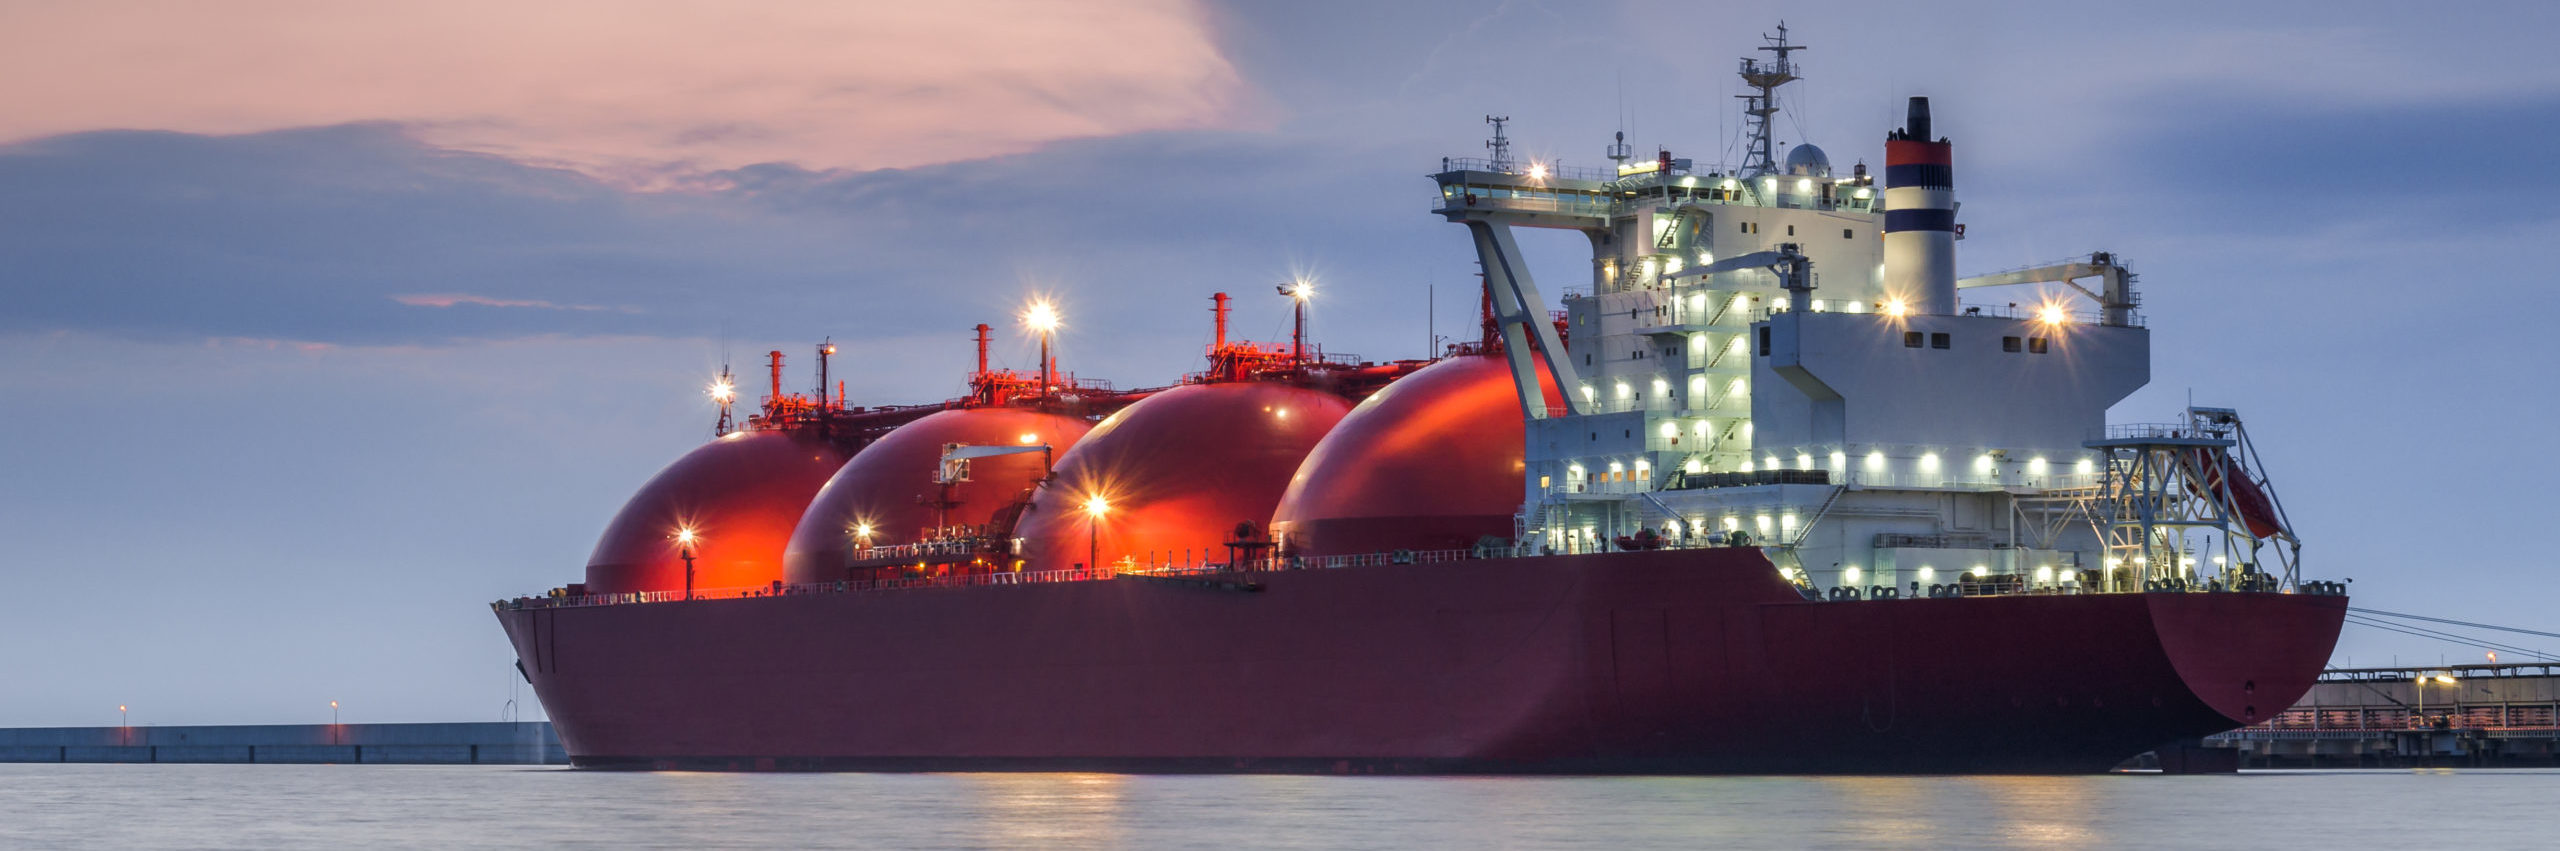 Liquefied Natural Gas (LNG) Cargo Operations and Re-liquefaction